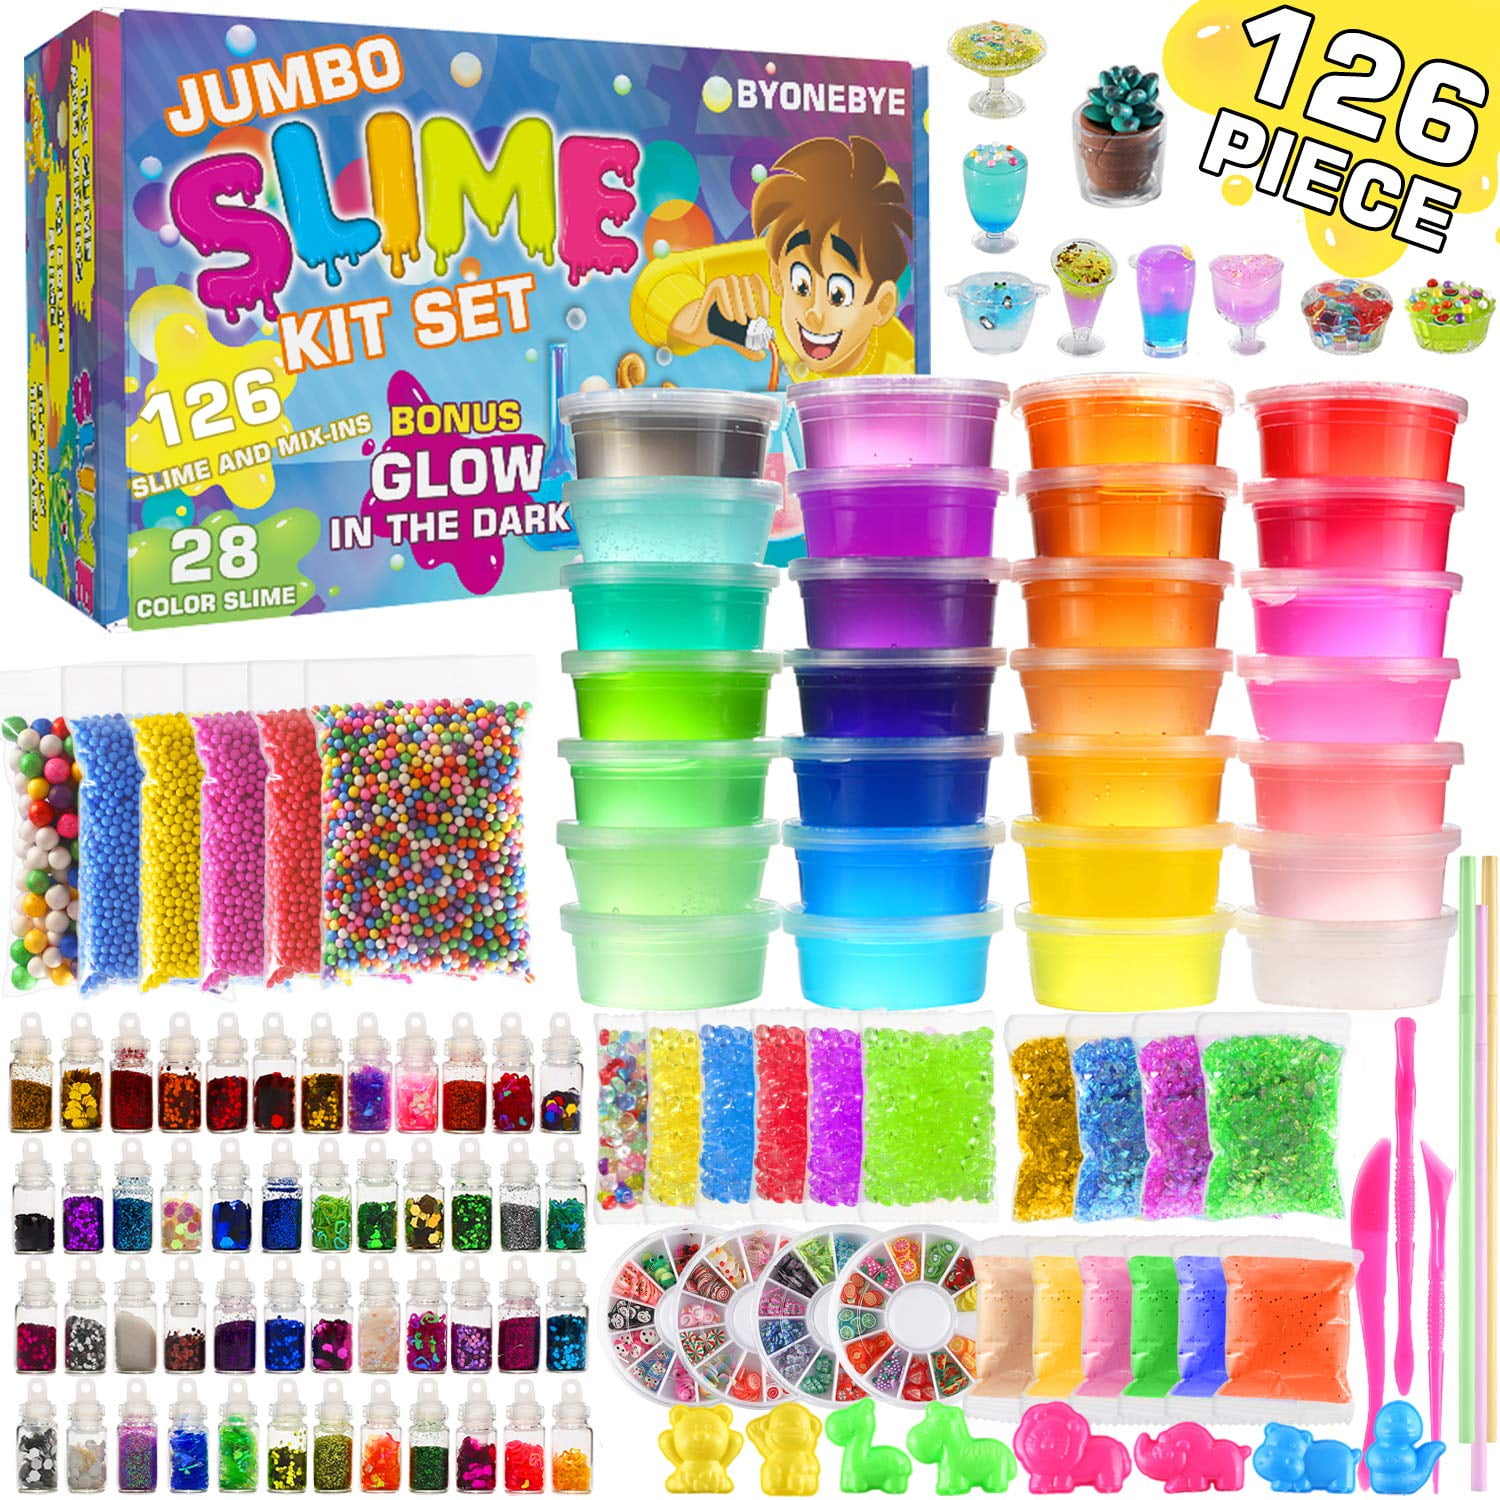 Ultimate Slime Kit for Girls 10-12 | Perfect Toys for Girls 7-12 Years Old  | Complete DIY Slime Making Kit for Kids and Boys | Christmas Party Favors